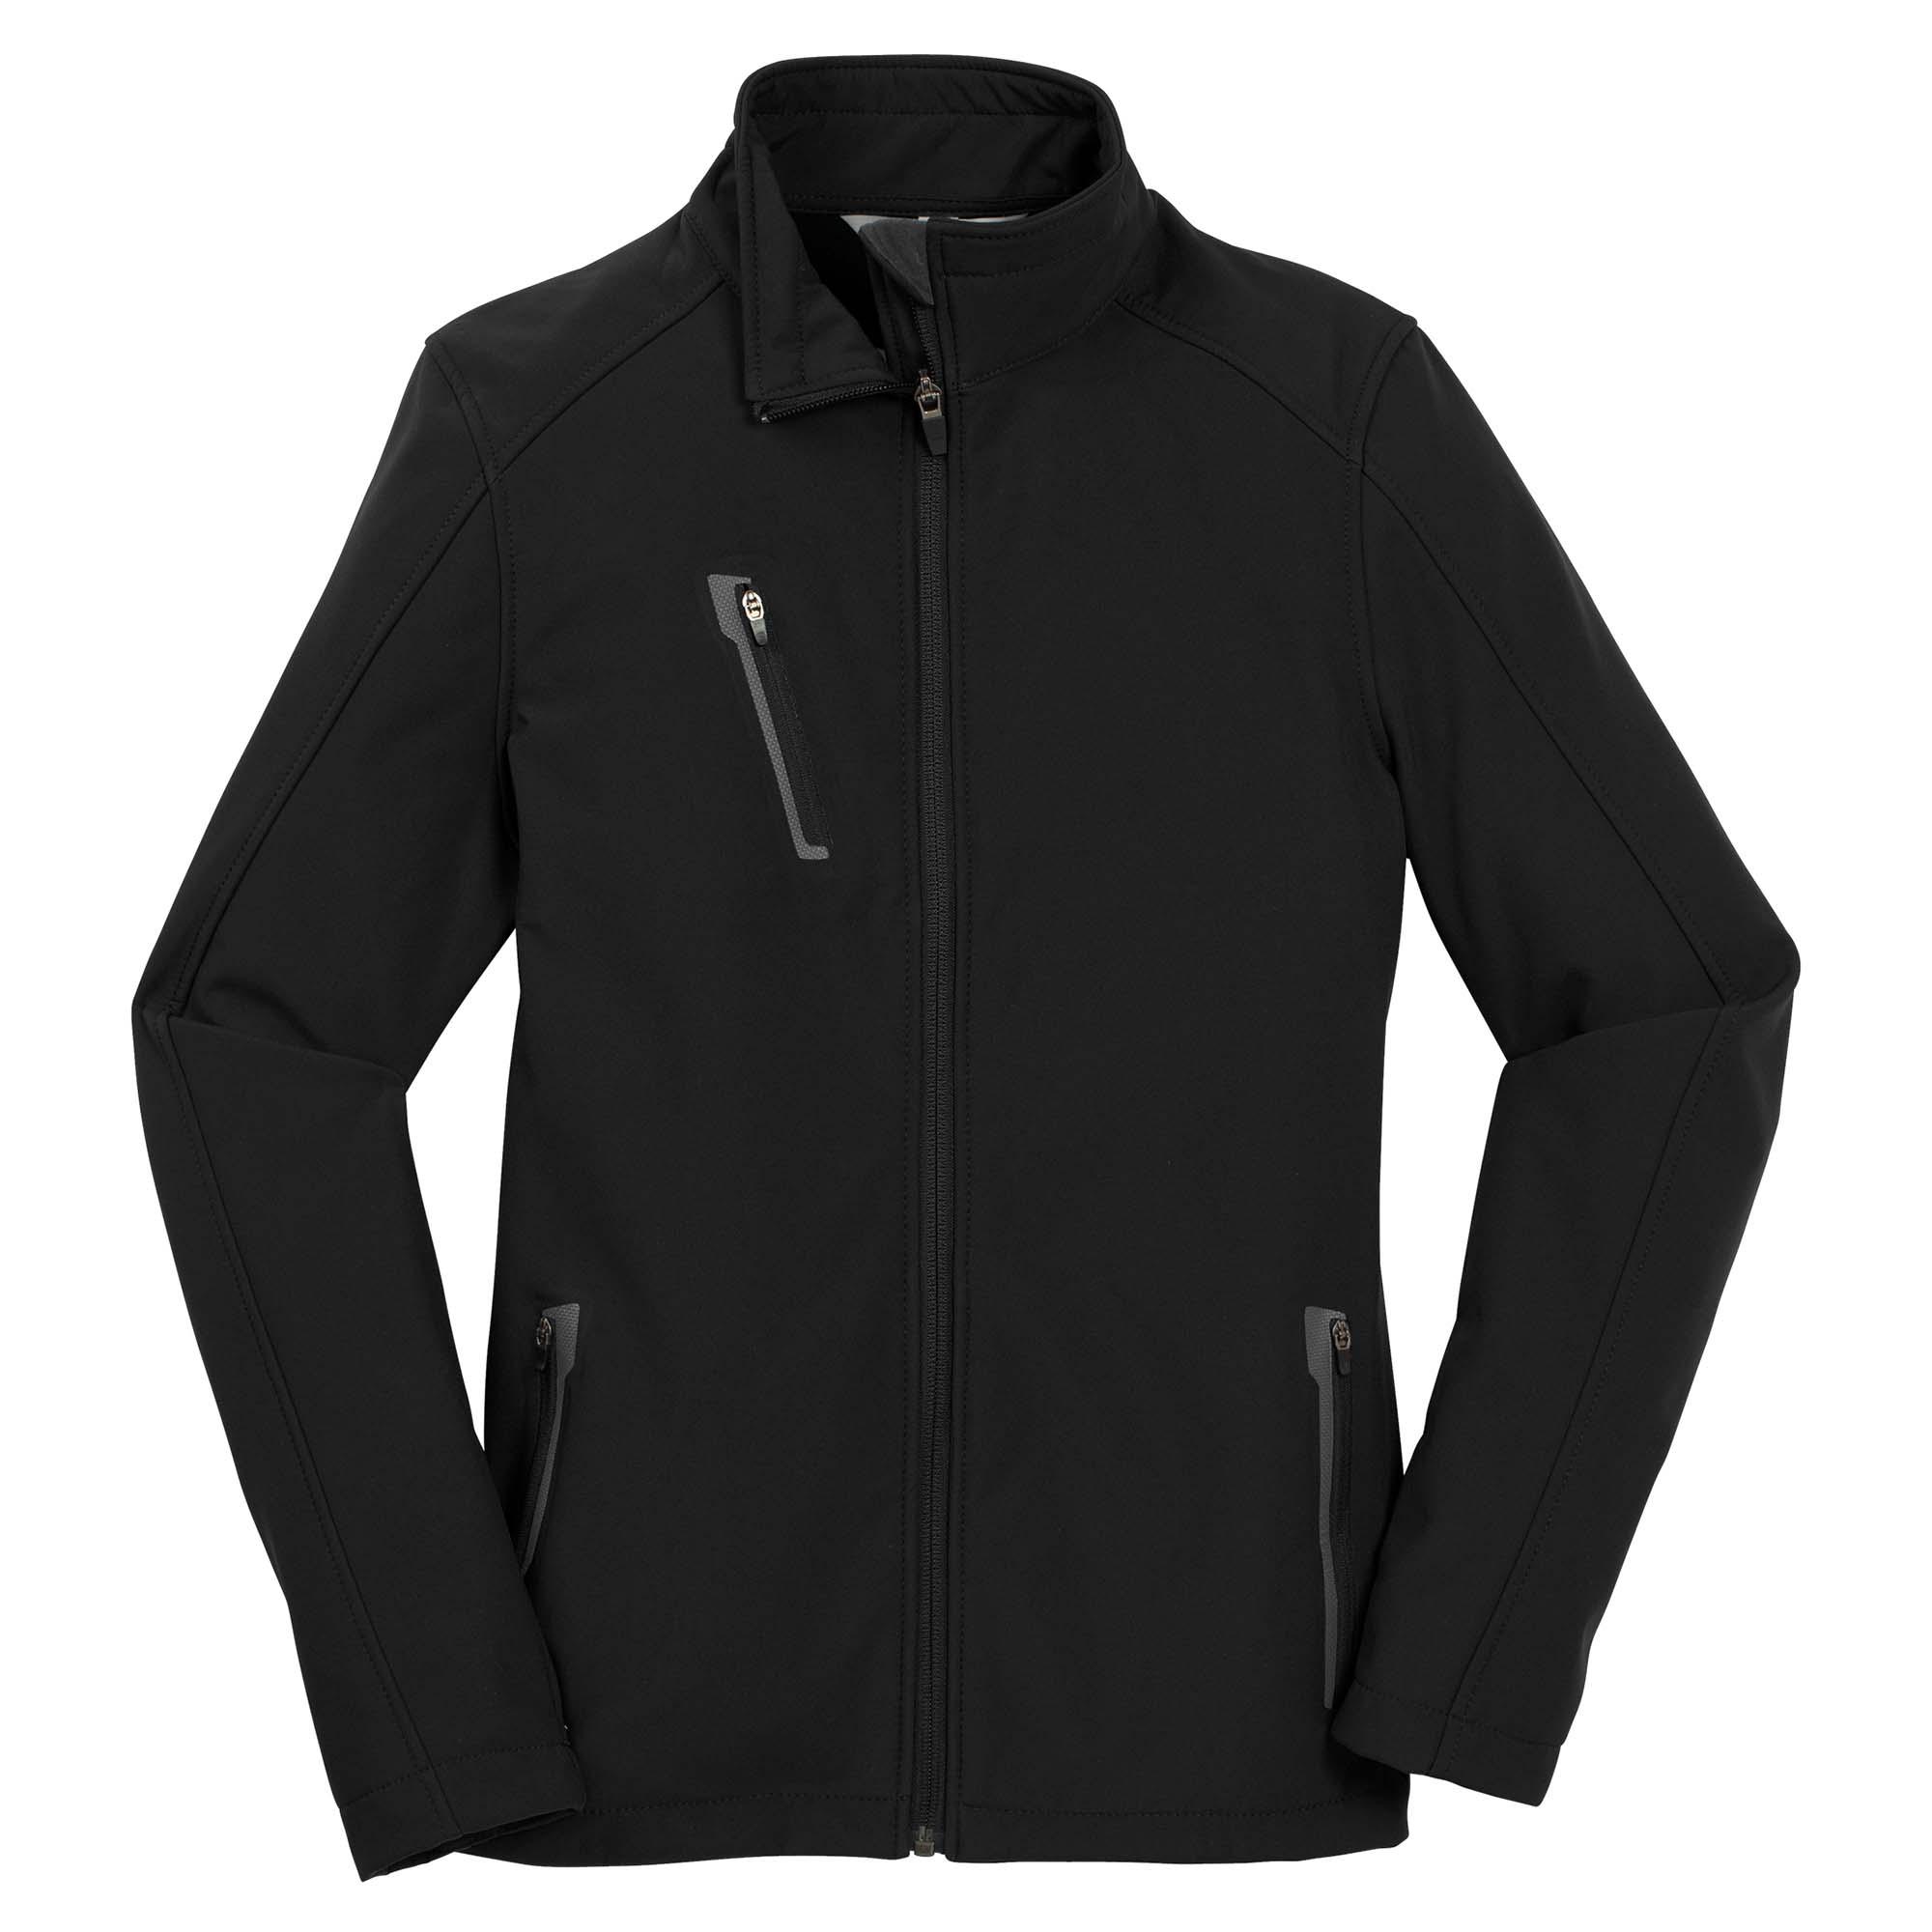 Port Authority L324 Ladies Welded Soft Shell Jacket - Black | Full Source